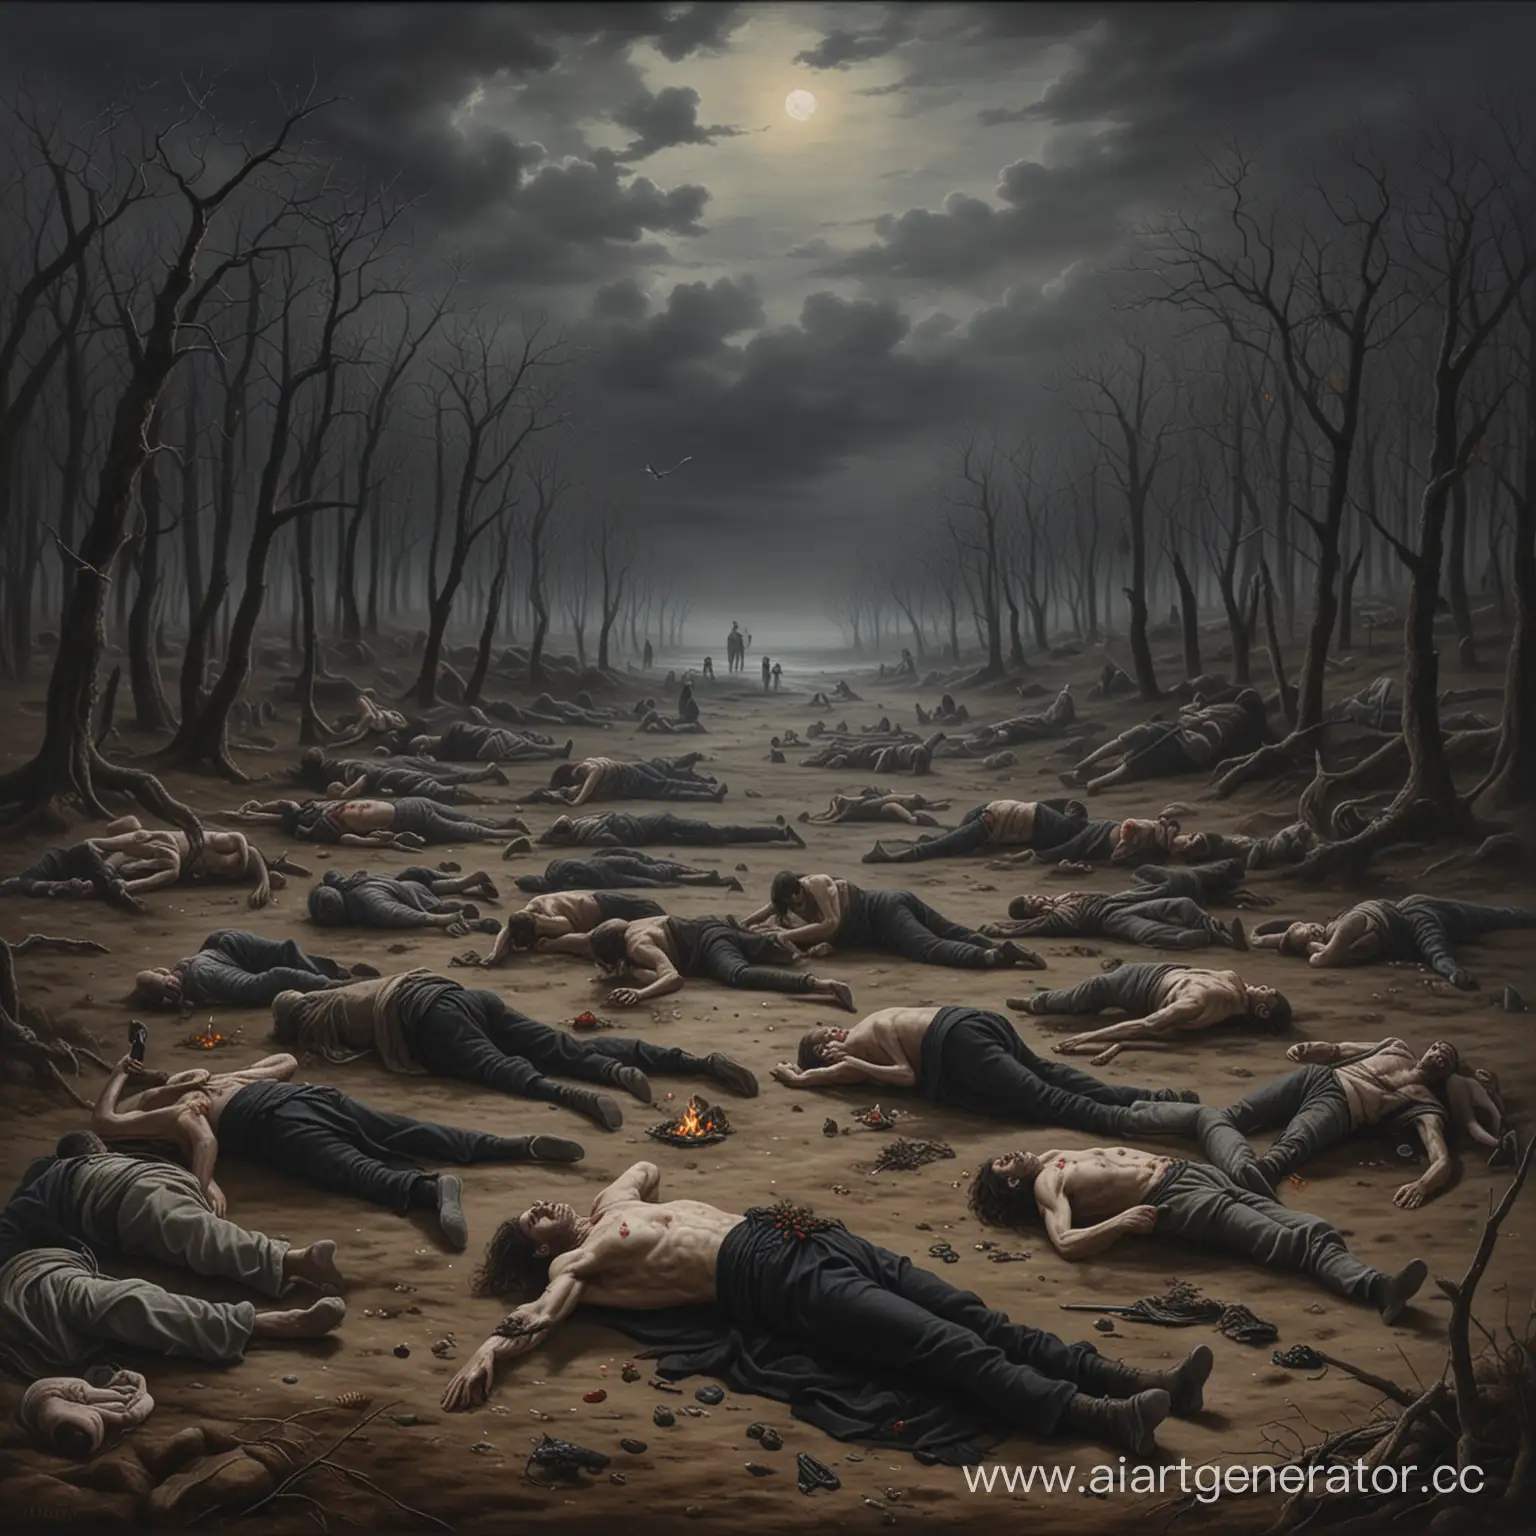 An oil painting depicting a holiday that ended unexpectedly and with deaths. There are bodies lying on the ground, and in the middle there is a figure that is going to die. Everything is executed in dark and gloomy tones.